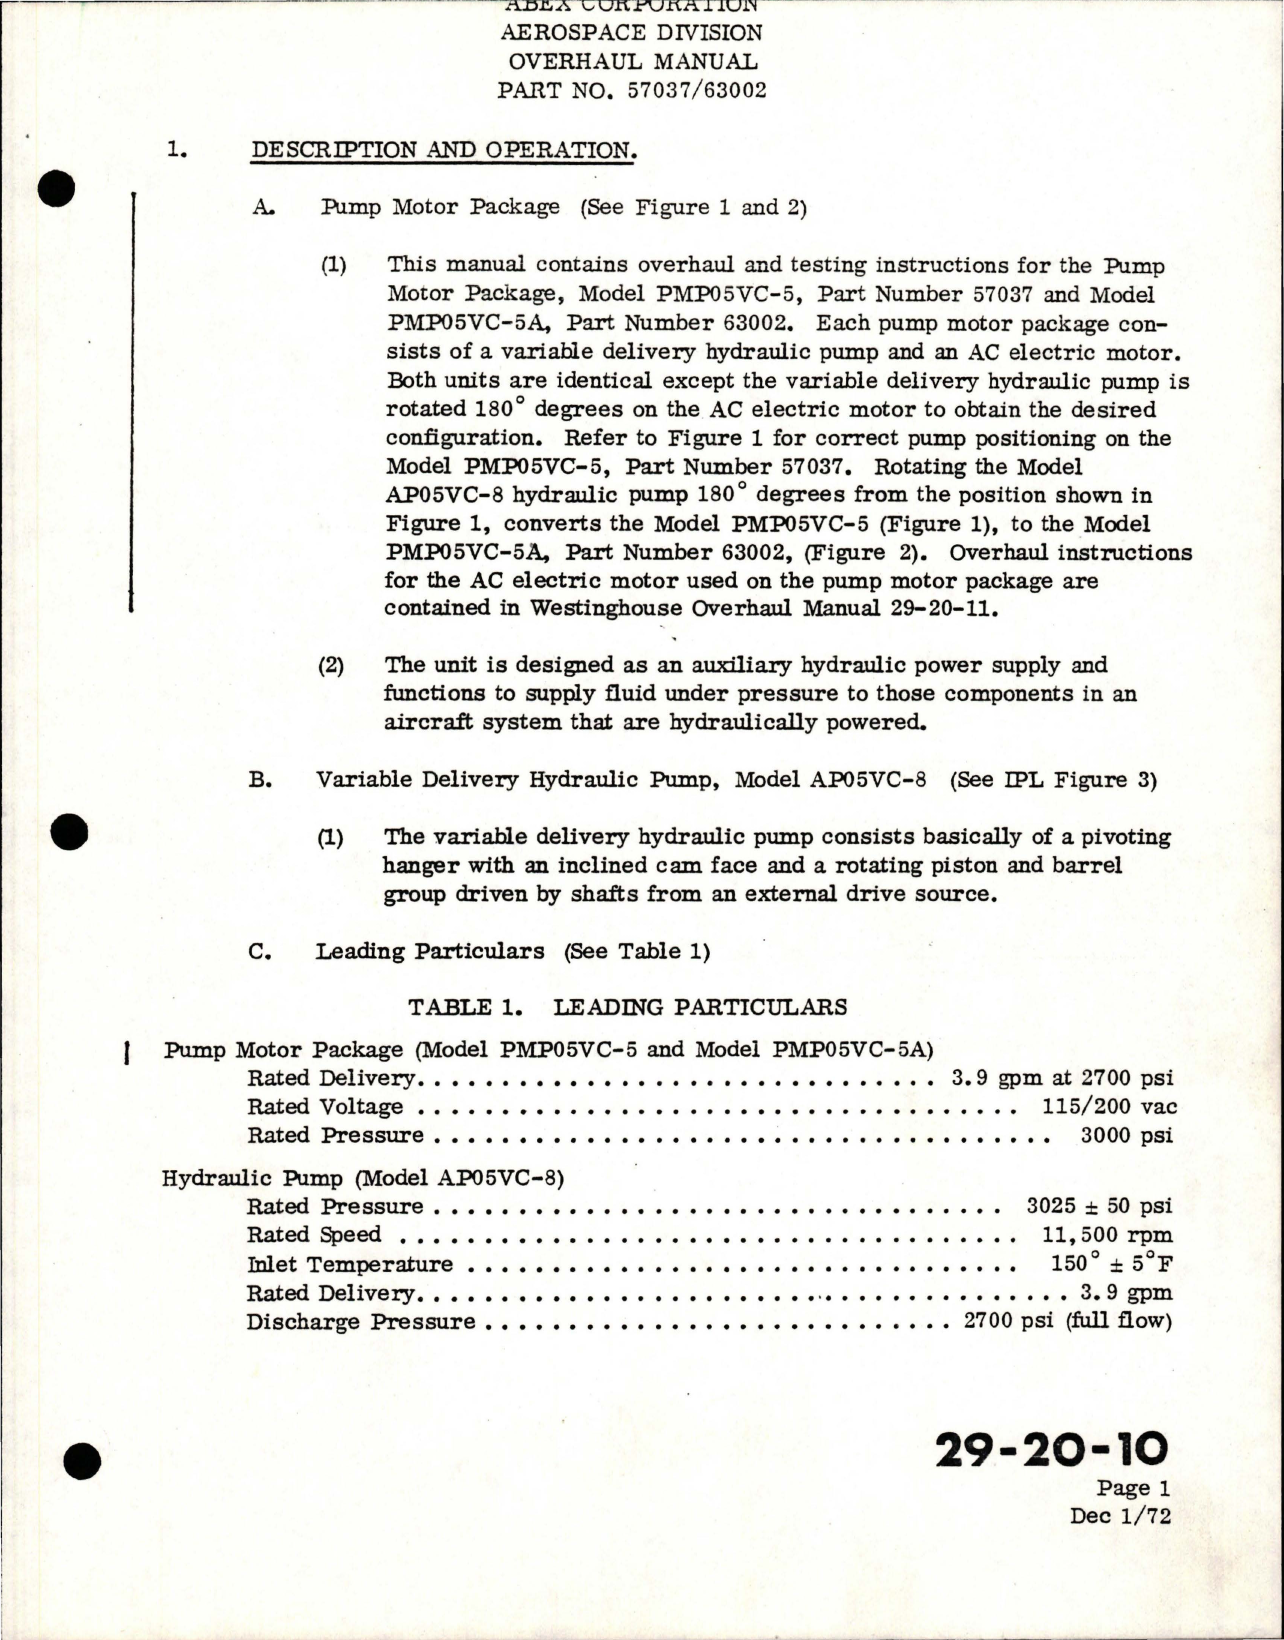 Sample page 7 from AirCorps Library document: Overhaul Manual for Pump and Motor Package - Parts 57037, 63002 - Models PMP05VC-5 and PMP05VC-5A 